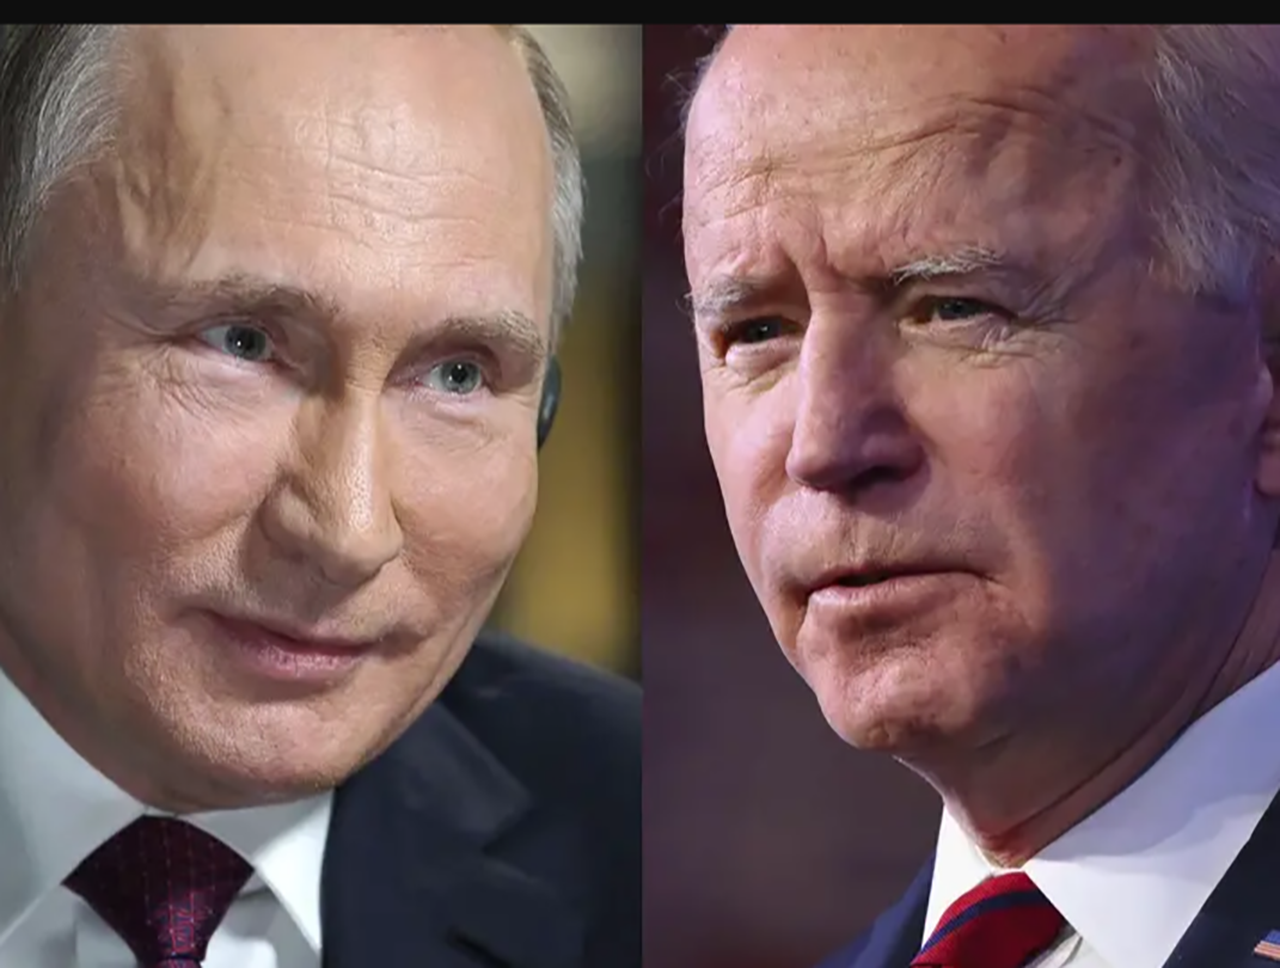 Putin Is The Aggressor, He Chose This War, He & His Country Will Bear The Consequences, Joe Biden 1